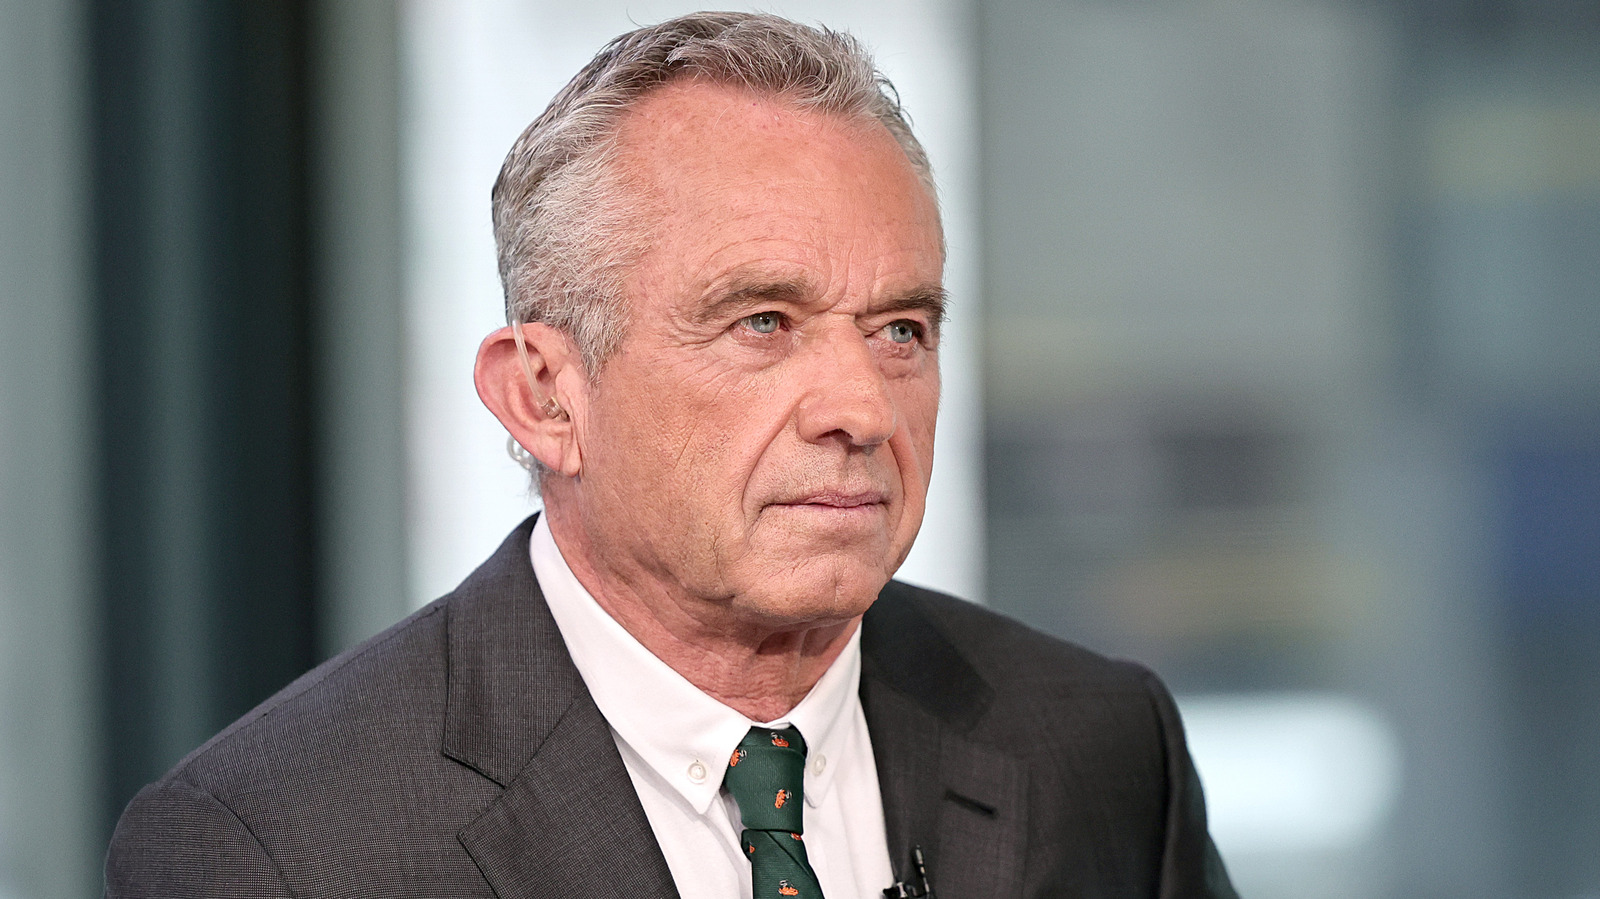 What Really Happened To Robert Kennedy Jr.'s Voice?